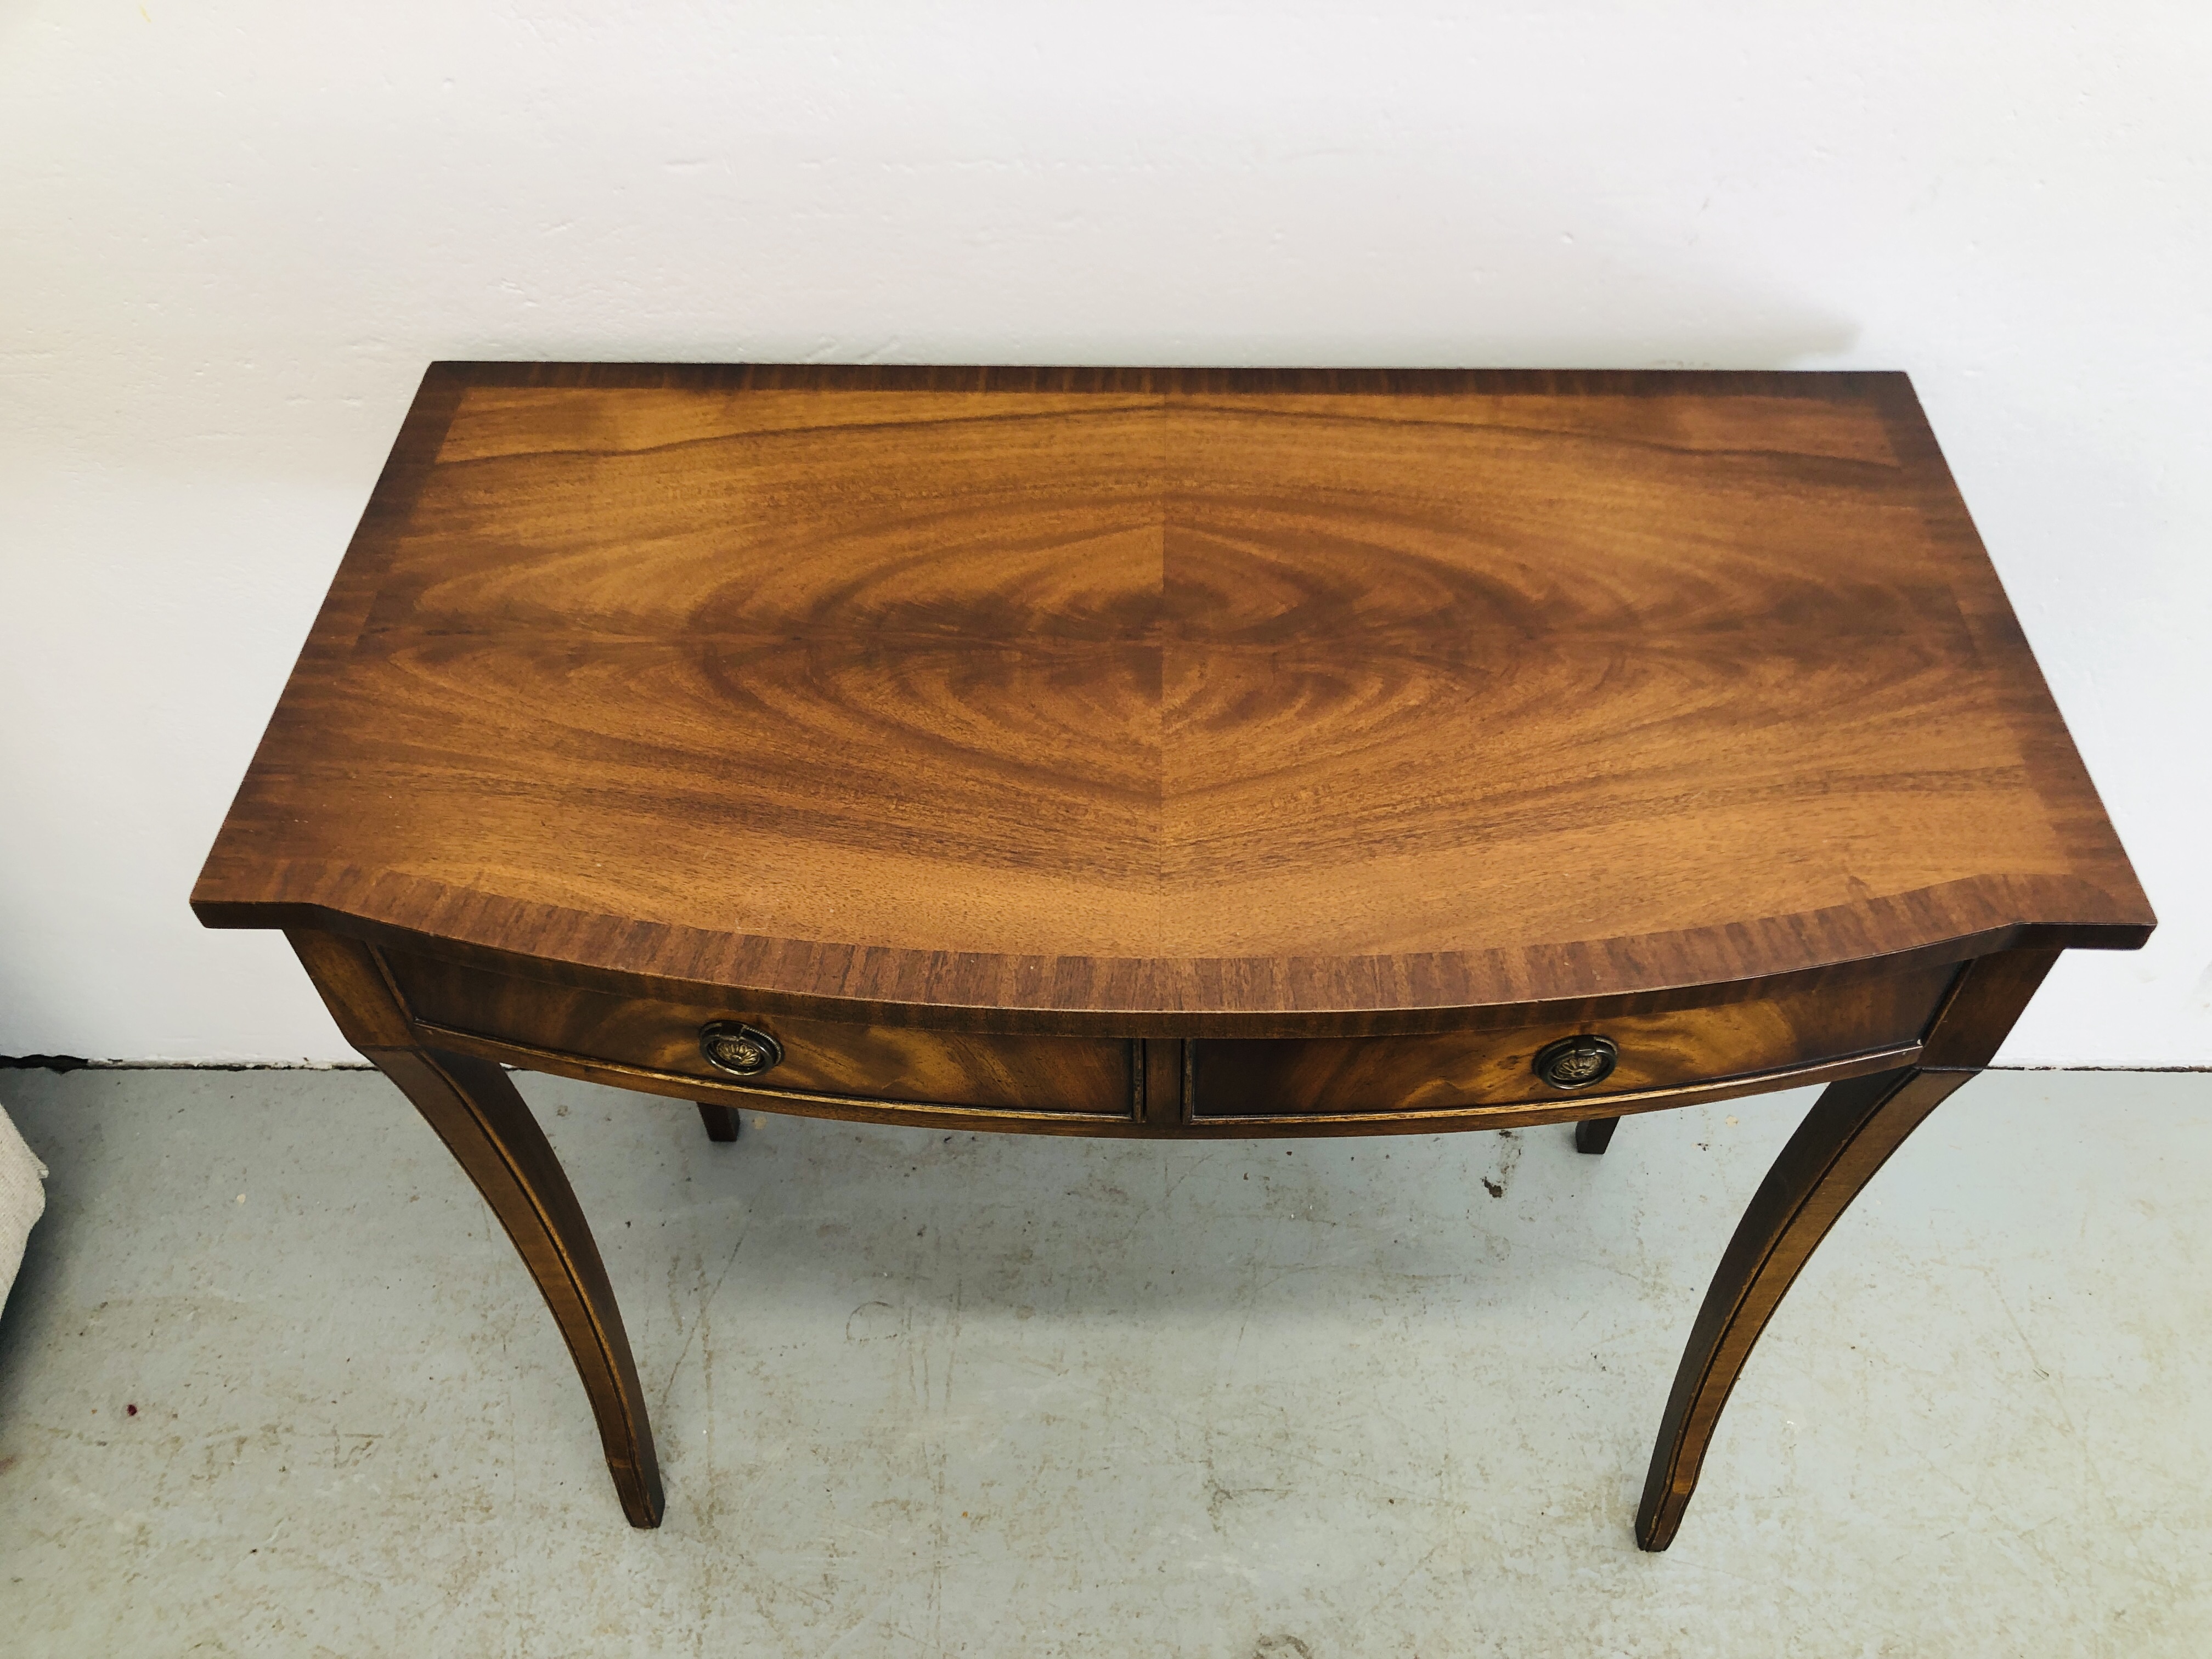 REPRODUCTION MAHOGANY FINISH COFFEE TABLE, BRADLEY MAKERS LABEL H 48CM, W 55CM, - Image 7 of 13